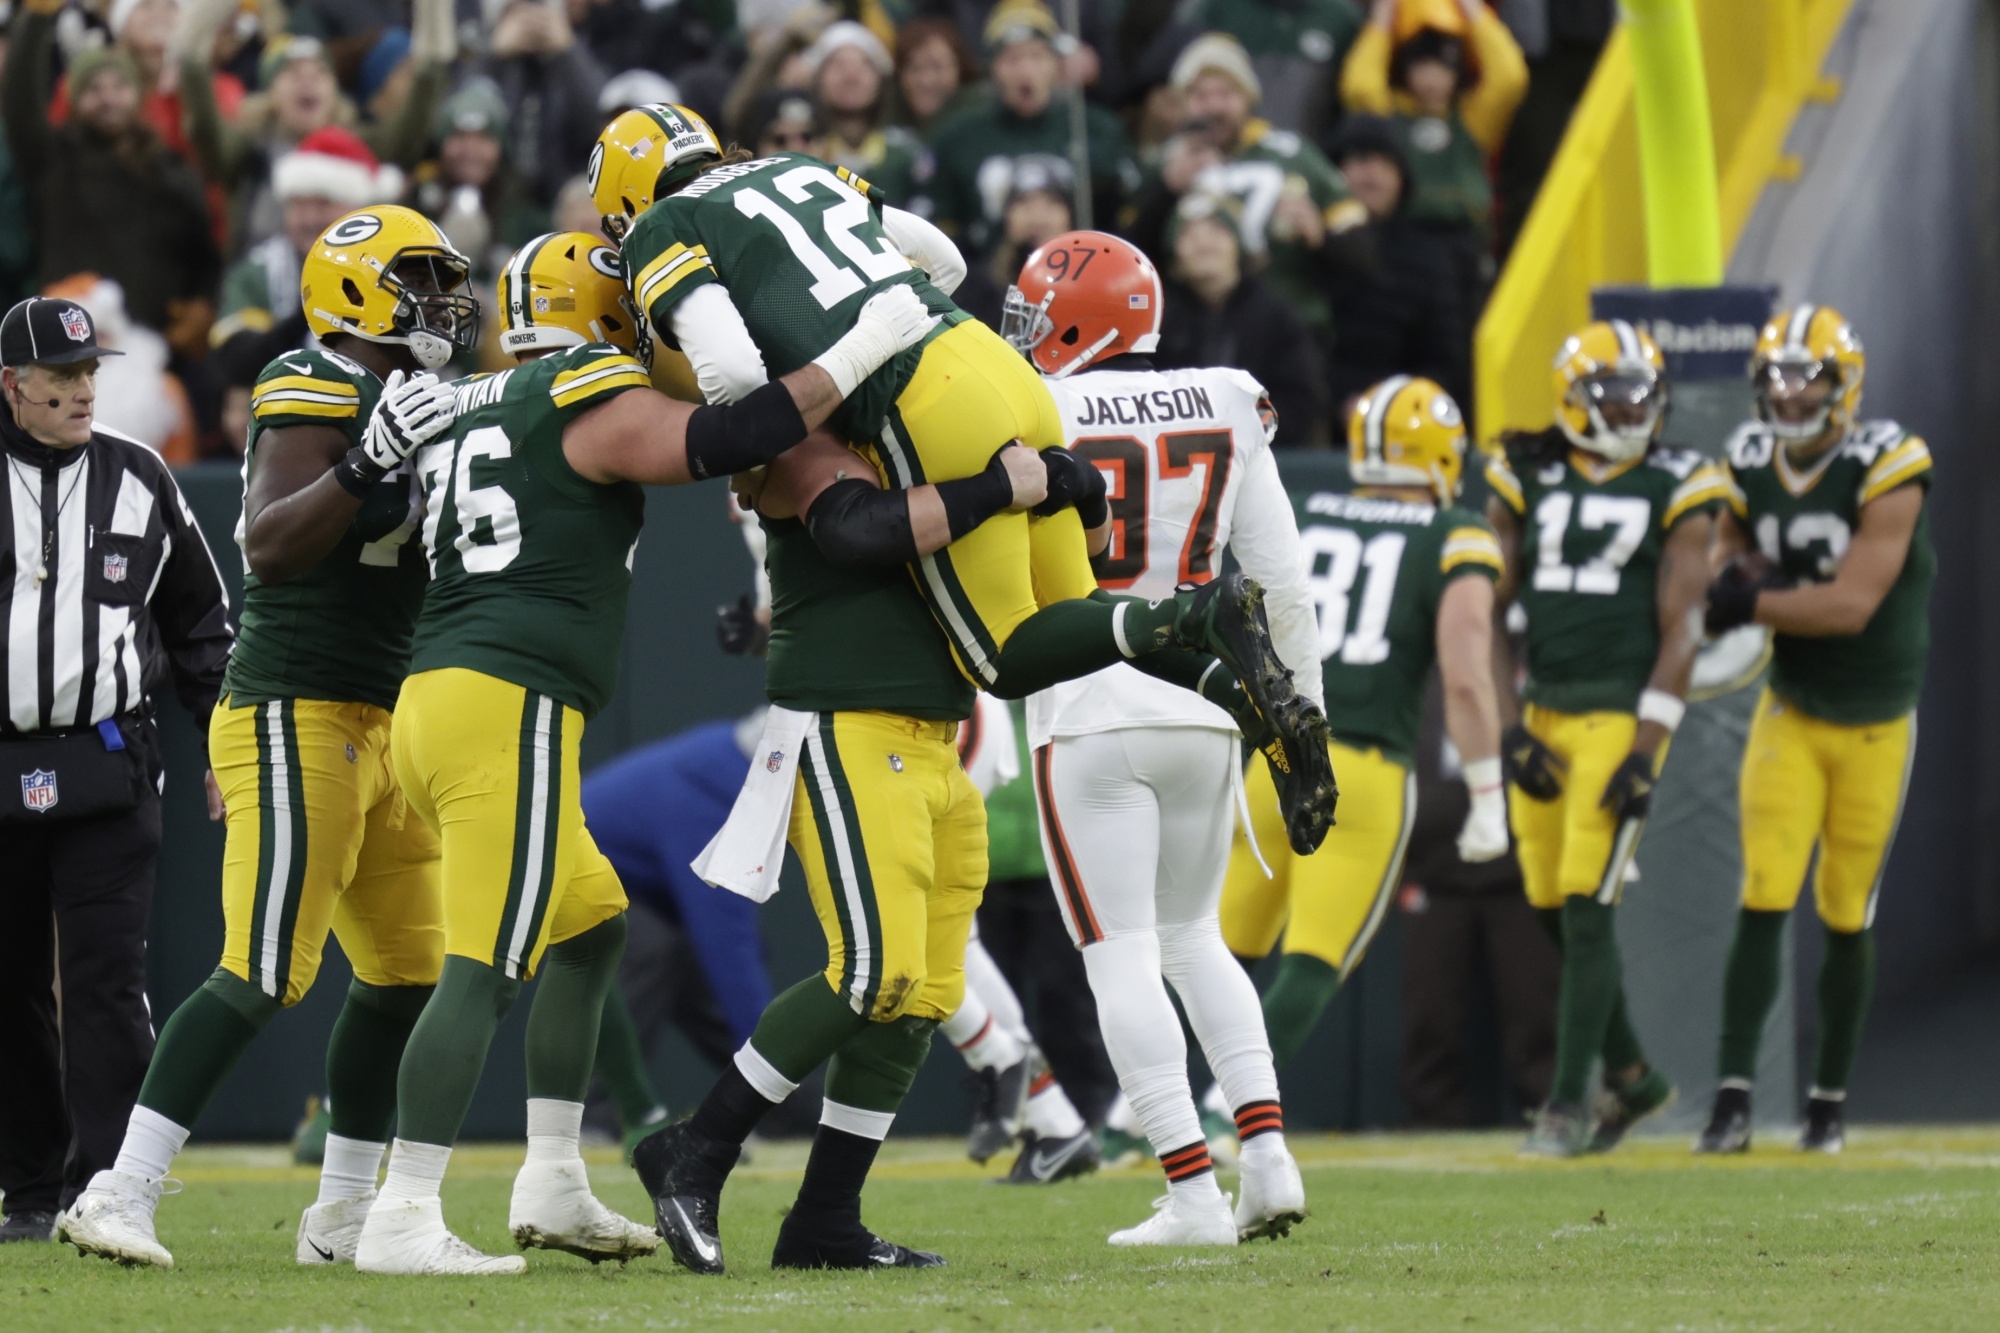 Rodgers Sets Team Record as Packers Hold Off Browns 24-22